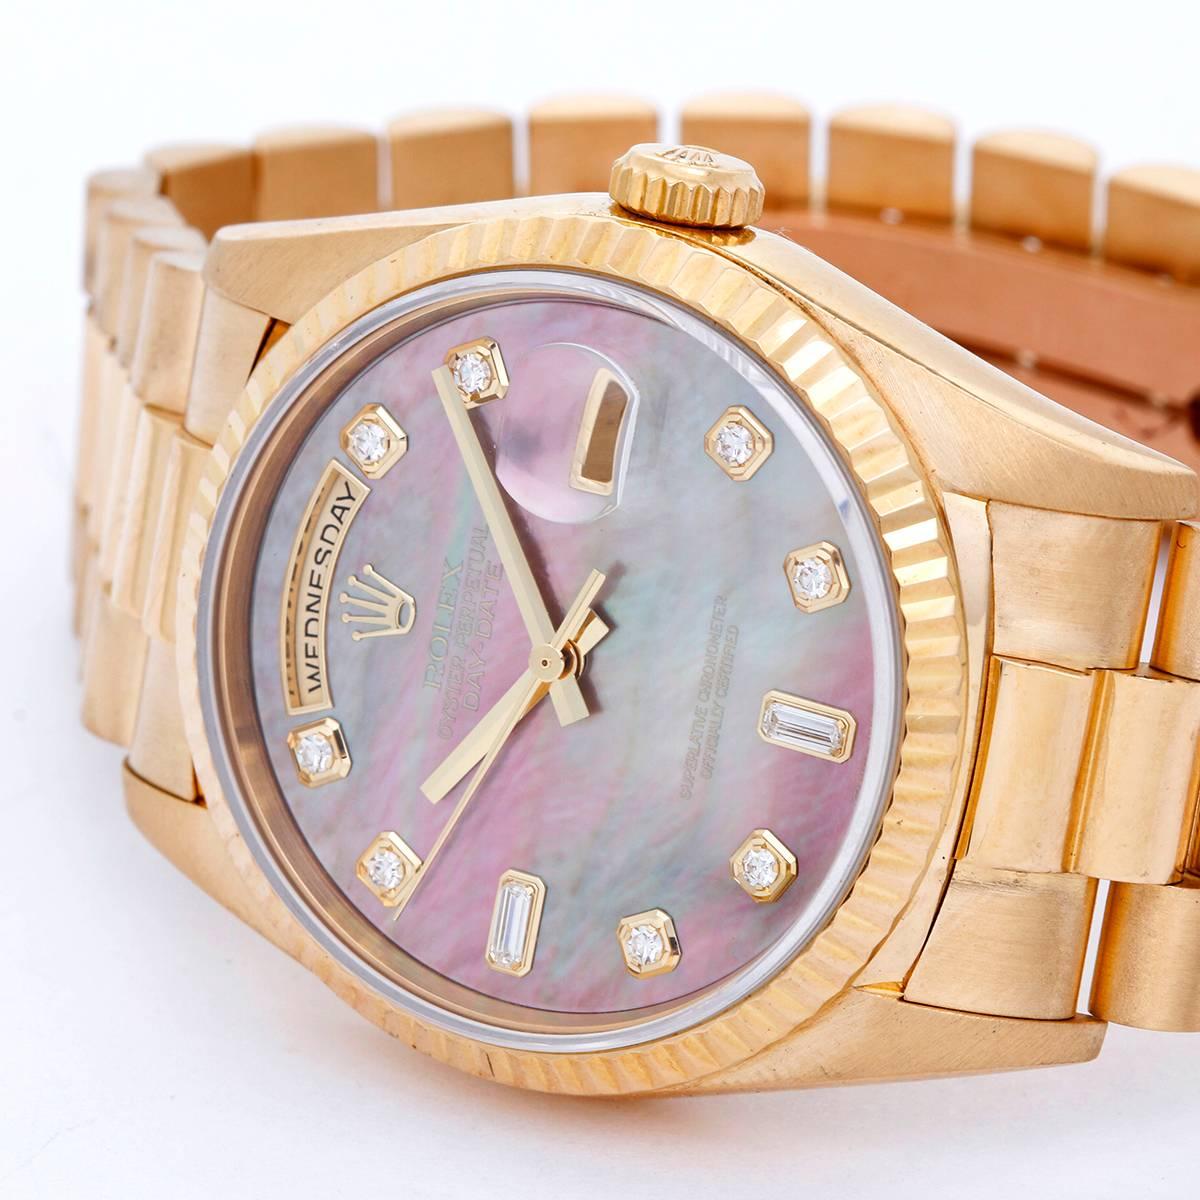 Men's Rolex President Day-Date Watch MOP  Dial 18238 -  Automatic winding, 31 jewels, double quickset, sapphire crystal. 18k yellow gold case (36mm diameter). Factory black mother of pearl dial with diamond hour markers. 18k yellow gold hidden-clasp